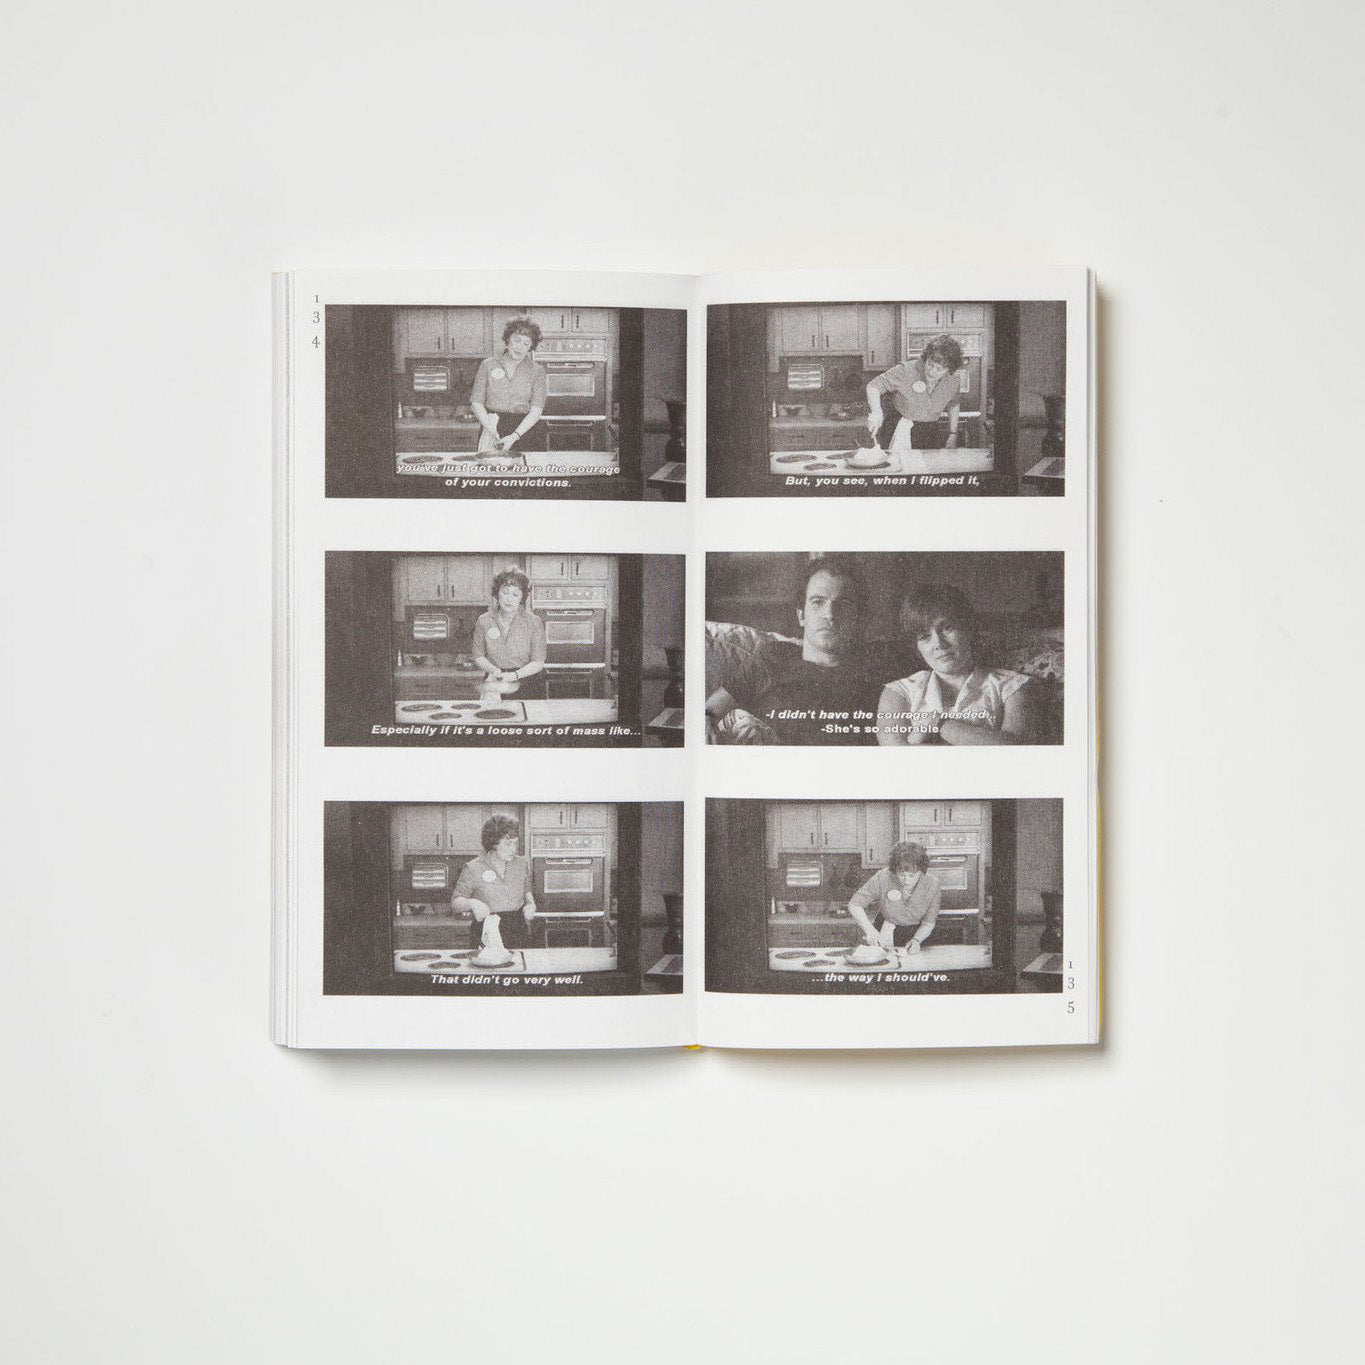 Cooking With Scorsese Vol. 1 by Hato Press